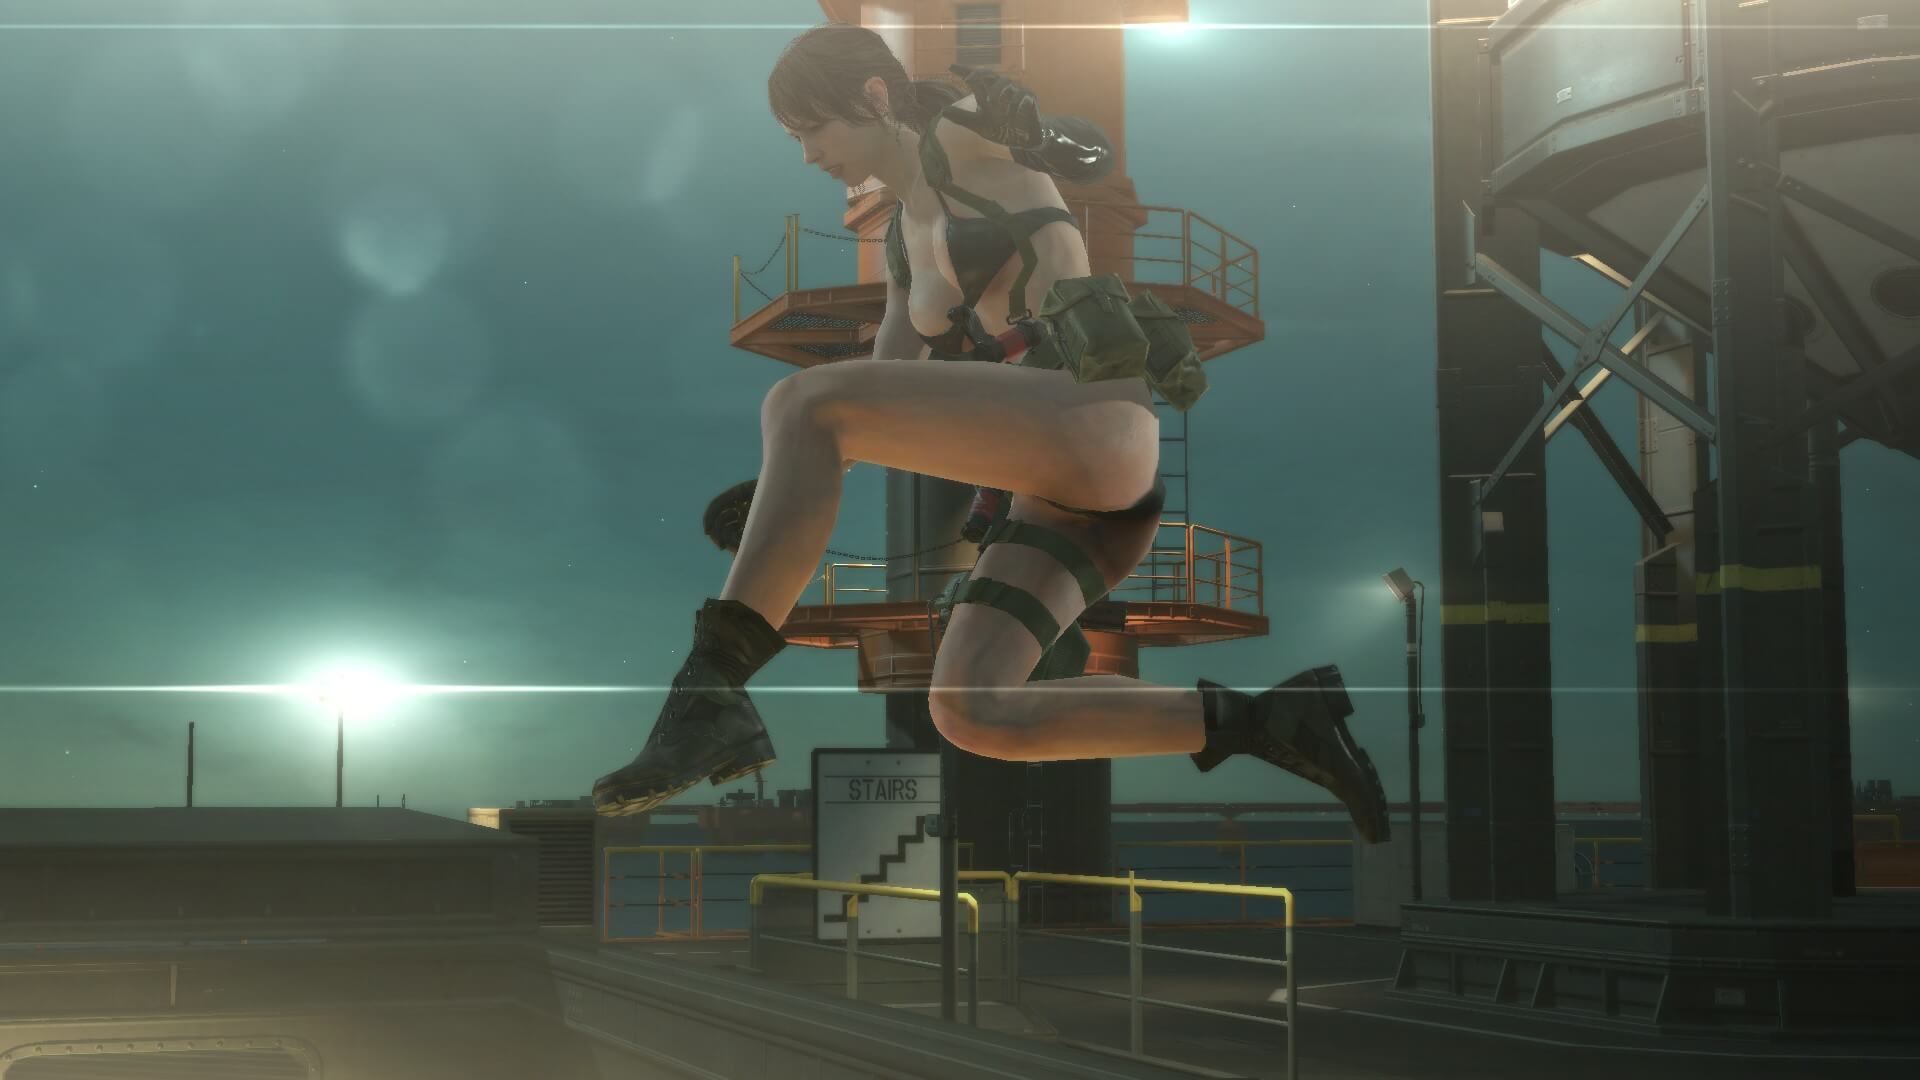 david desbois recommends mgs quiet nude mod pic